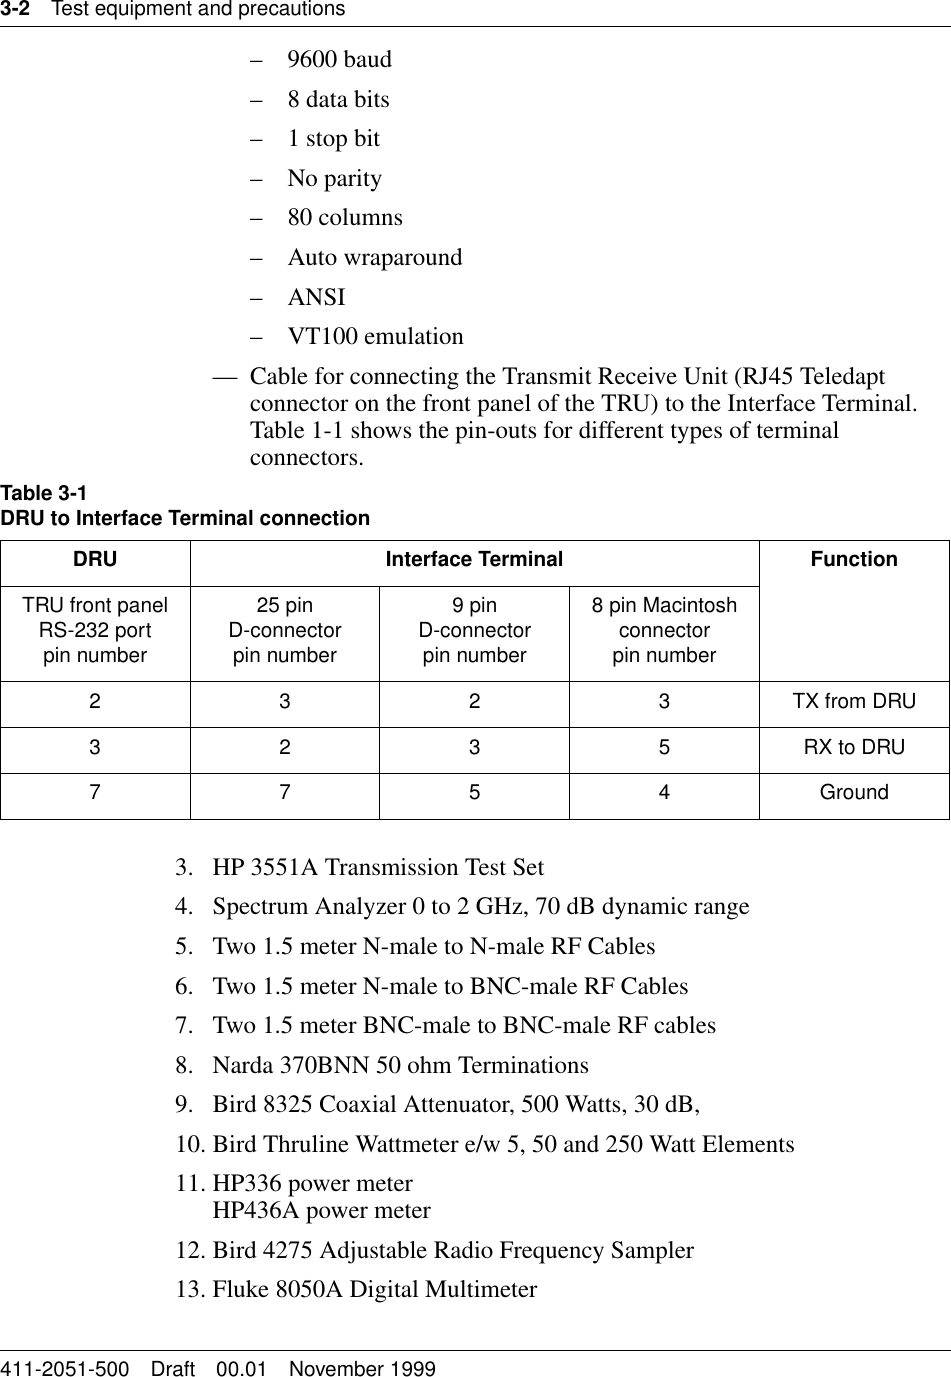 3-2 Test equipment and precautions411-2051-500 Draft 00.01 November 1999– 9600 baud– 8 data bits– 1 stop bit– No parity– 80 columns– Auto wraparound–ANSI– VT100 emulation— Cable for connecting the Transmit Receive Unit (RJ45 Teledapt connector on the front panel of the TRU) to the Interface Terminal. Table 1-1 shows the pin-outs for different types of terminal connectors.3. HP 3551A Transmission Test Set4. Spectrum Analyzer 0 to 2 GHz, 70 dB dynamic range5. Two 1.5 meter N-male to N-male RF Cables6. Two 1.5 meter N-male to BNC-male RF Cables7. Two 1.5 meter BNC-male to BNC-male RF cables8. Narda 370BNN 50 ohm Terminations9. Bird 8325 Coaxial Attenuator, 500 Watts, 30 dB,10. Bird Thruline Wattmeter e/w 5, 50 and 250 Watt Elements11. HP336 power meterHP436A power meter12. Bird 4275 Adjustable Radio Frequency Sampler13. Fluke 8050A Digital MultimeterTable 3-1DRU to Interface Terminal connectionDRU Interface Terminal FunctionTRU front panel RS-232 portpin number25 pinD-connectorpin number9 pinD-connectorpin number8 pin Macintosh connectorpin number2 3 2 3 TX from DRU3 2 3 5 RX to DRU7754Ground